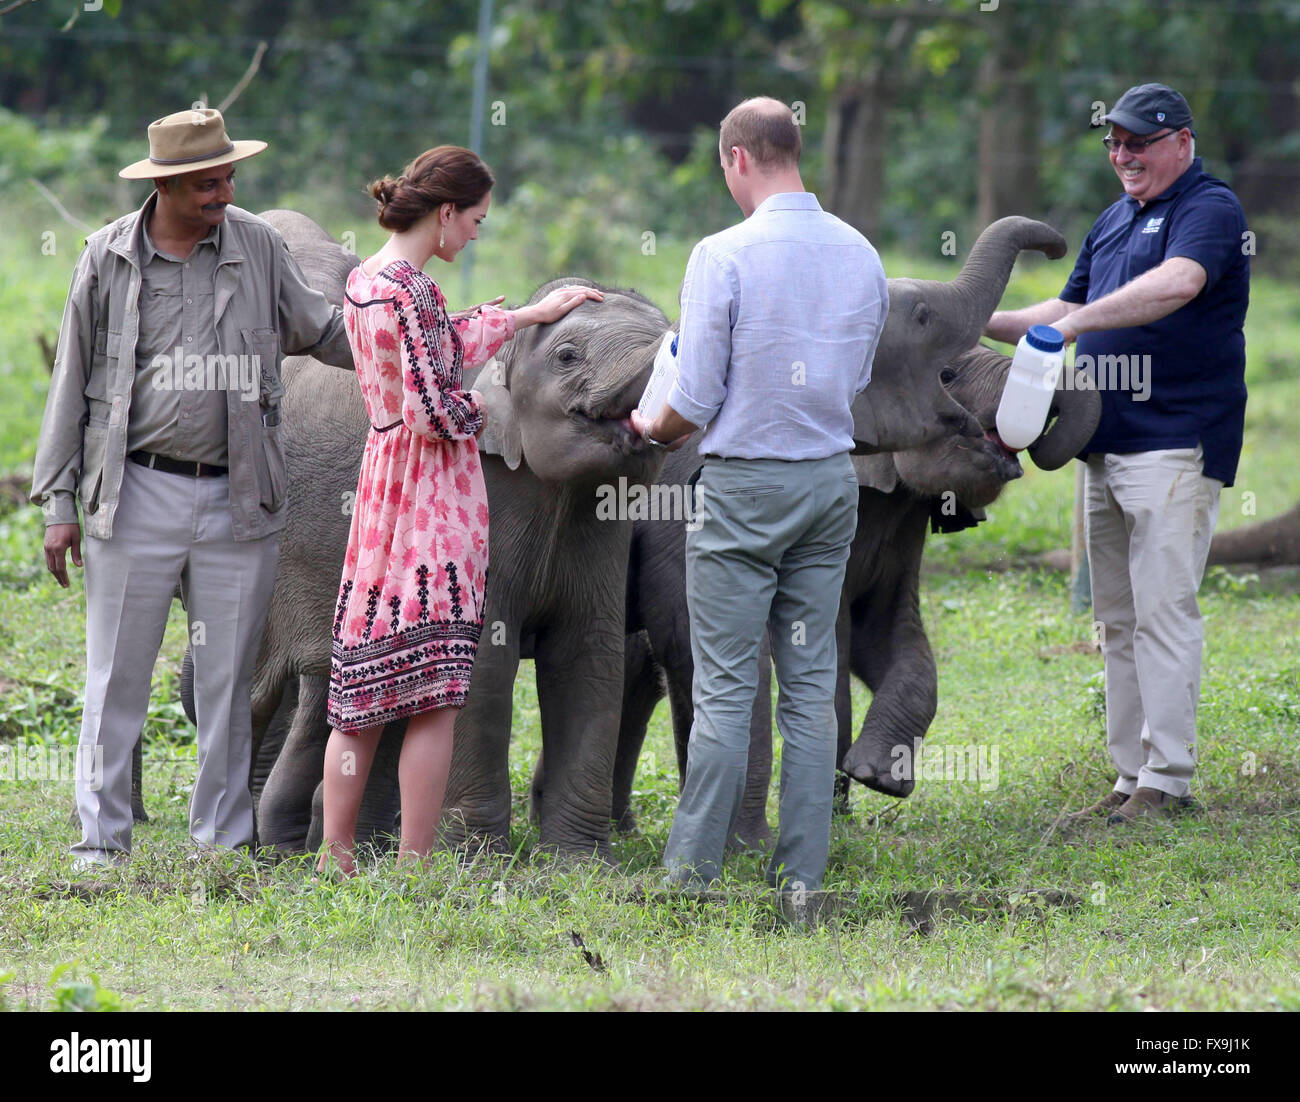 Guwahati, Assam, India. 13th April, 2016. A handout picture, dated 13 April 2016, shows Prince William (2nd R) and Dutchess Kate (2nd L) feeding elephants at the rehabilitation centre for wild animals in Guwahati, Assam, India. The centre is run by IFAW (International Fund for Animal Welfare) Wildlife Trust for India (WTI) and the regional forest agency Assam (AFD). The British royal couple is on a one-week trip visiting India and Bhutan. Credit:  dpa picture alliance/Alamy Live News Stock Photo